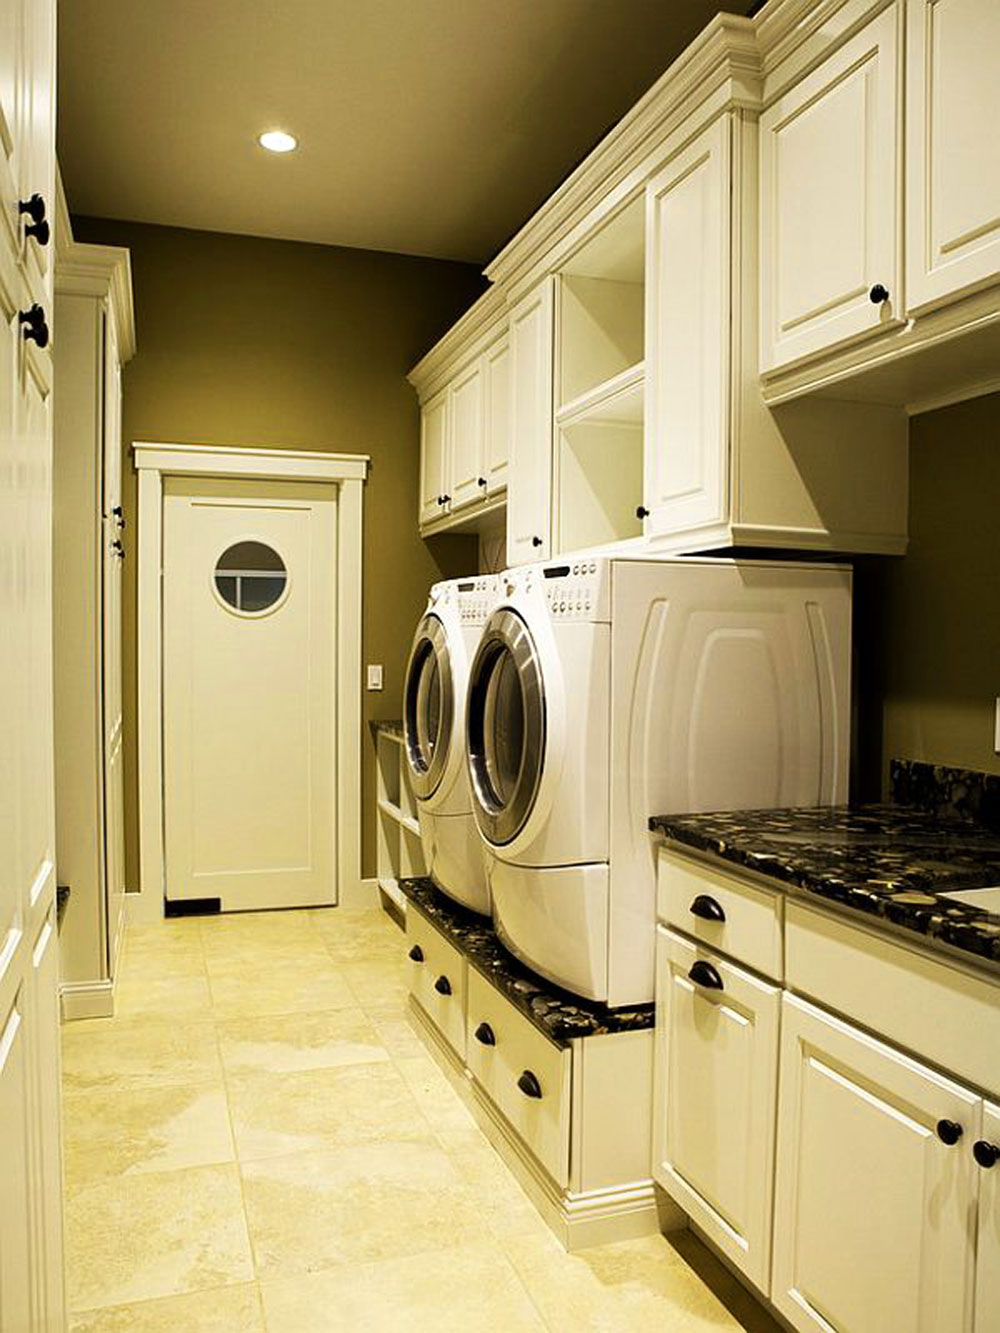 Laundry-room-ideas-for-a-clean-house-8 laundry-room-ideas-for-a-clean-house